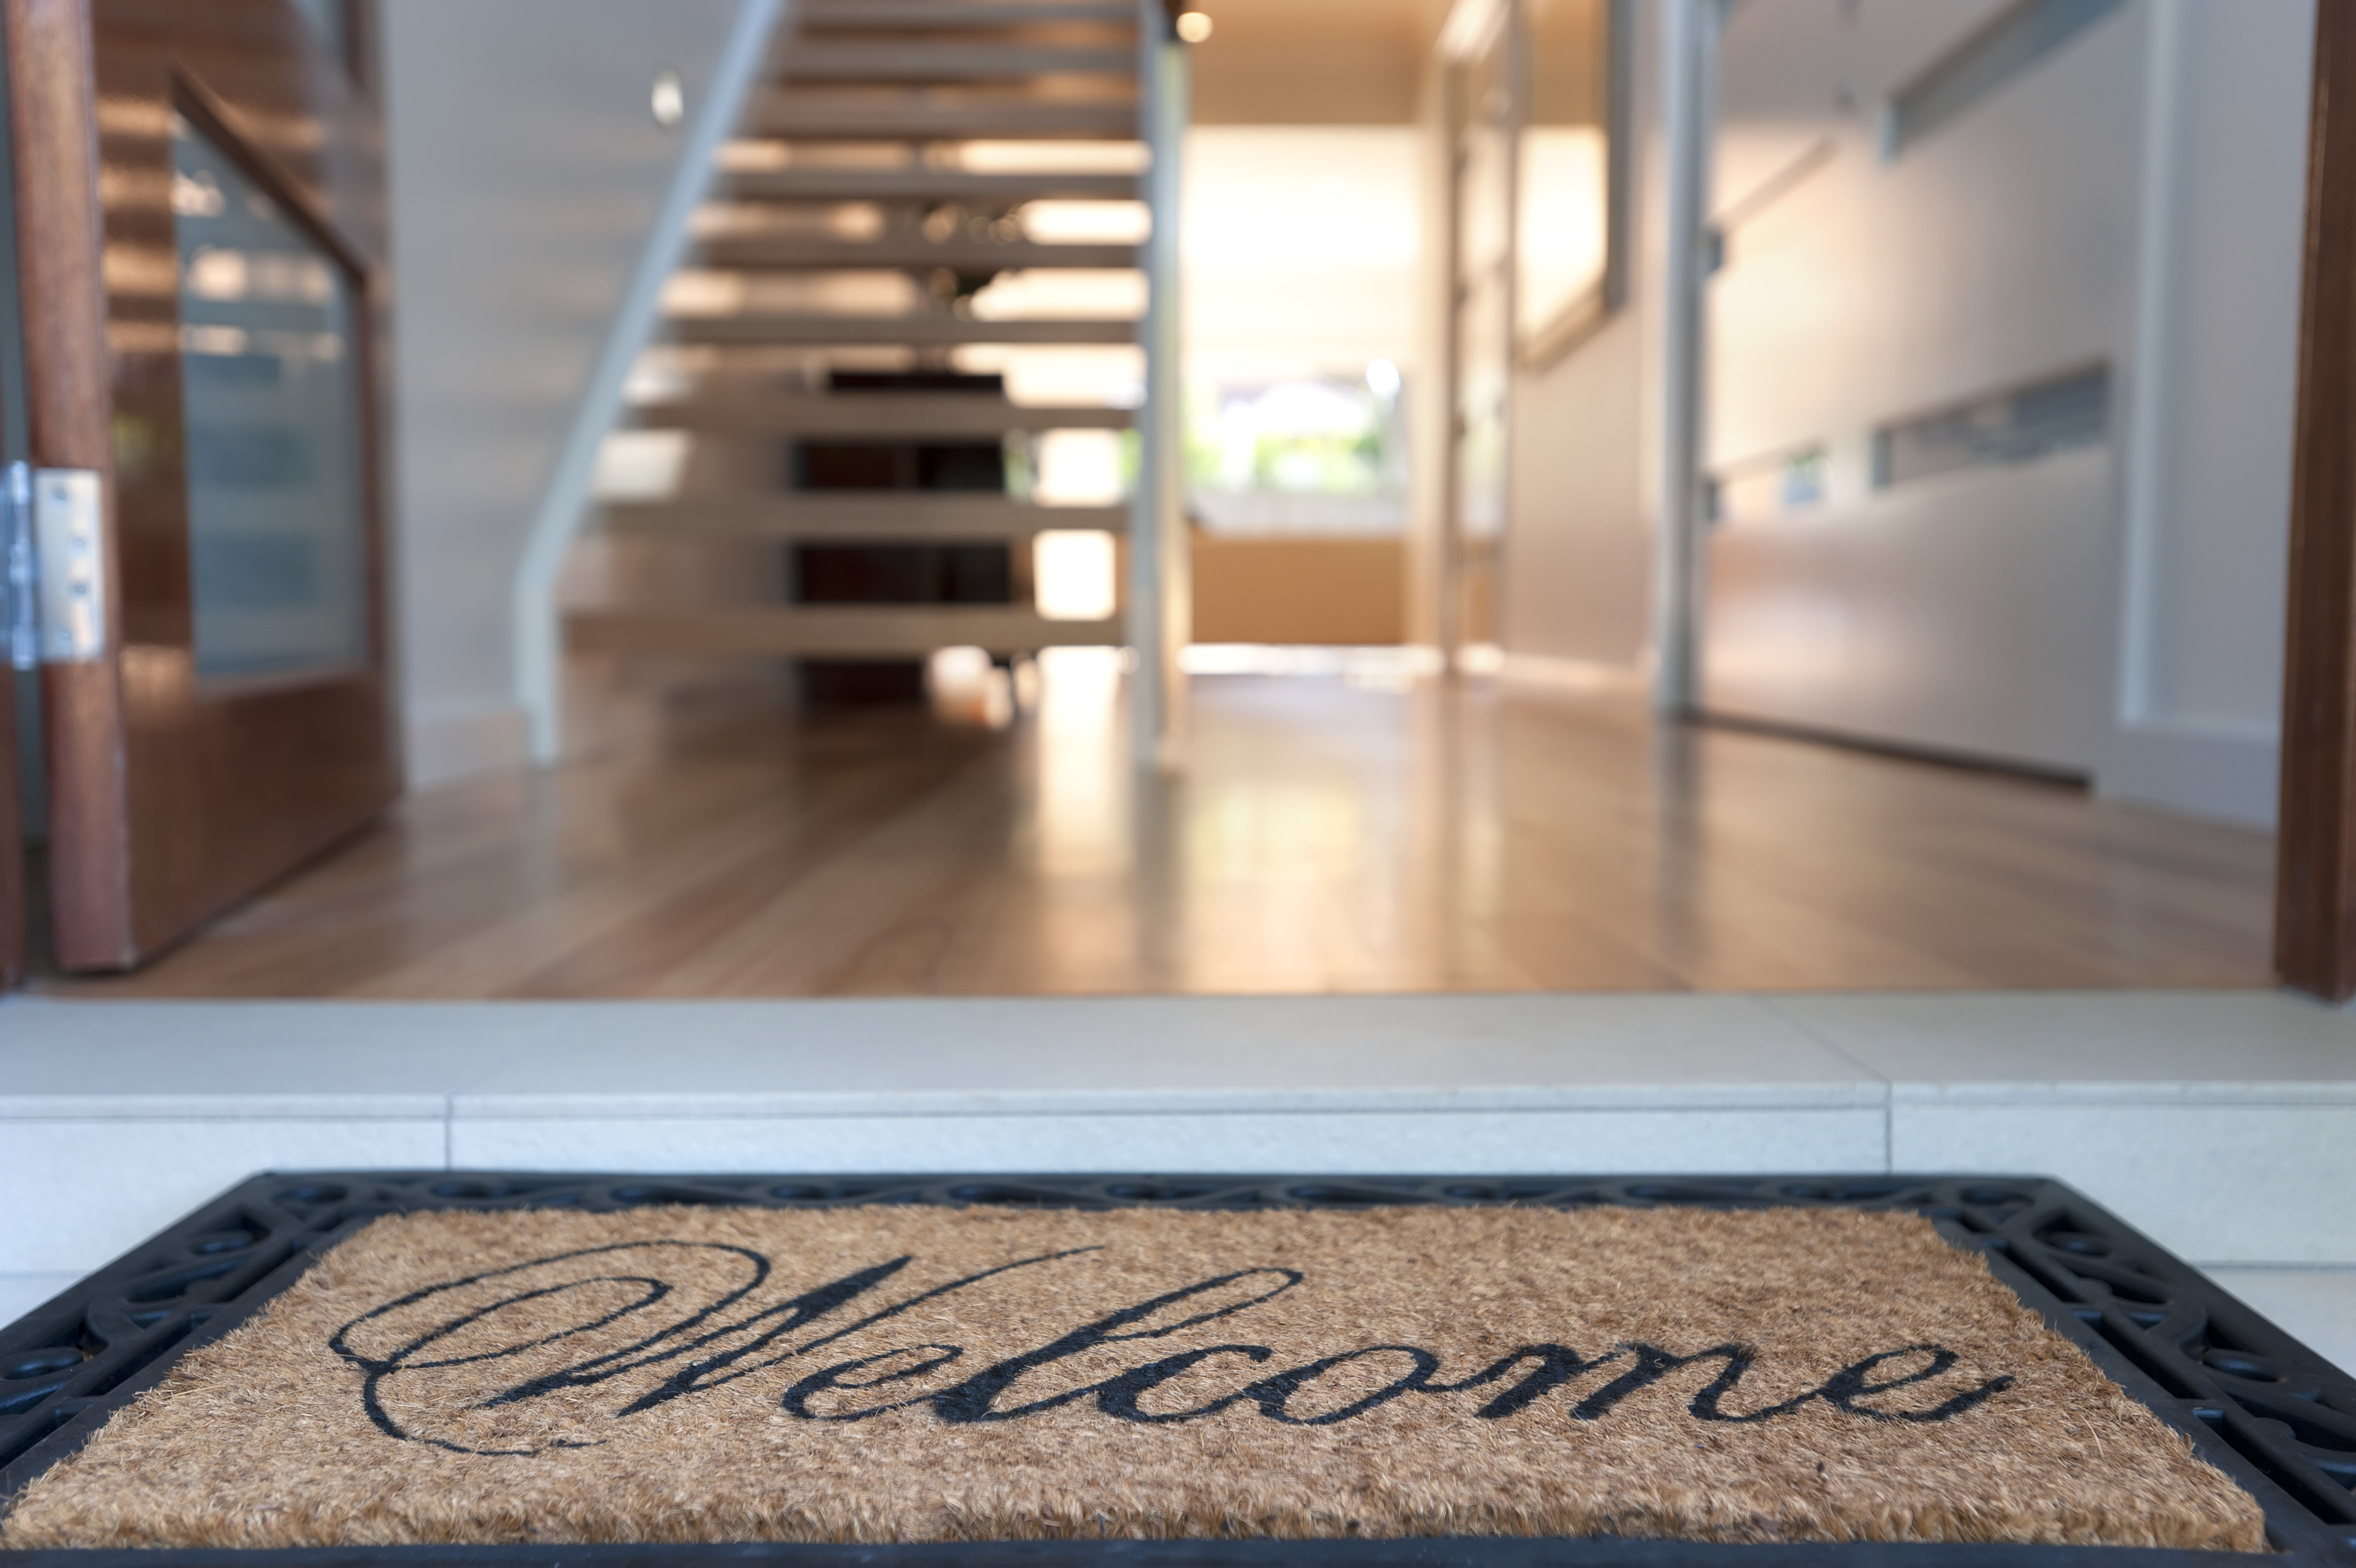 A welcome mat at the threshold of an open doorway leading to a modern interior with stairs with no railing